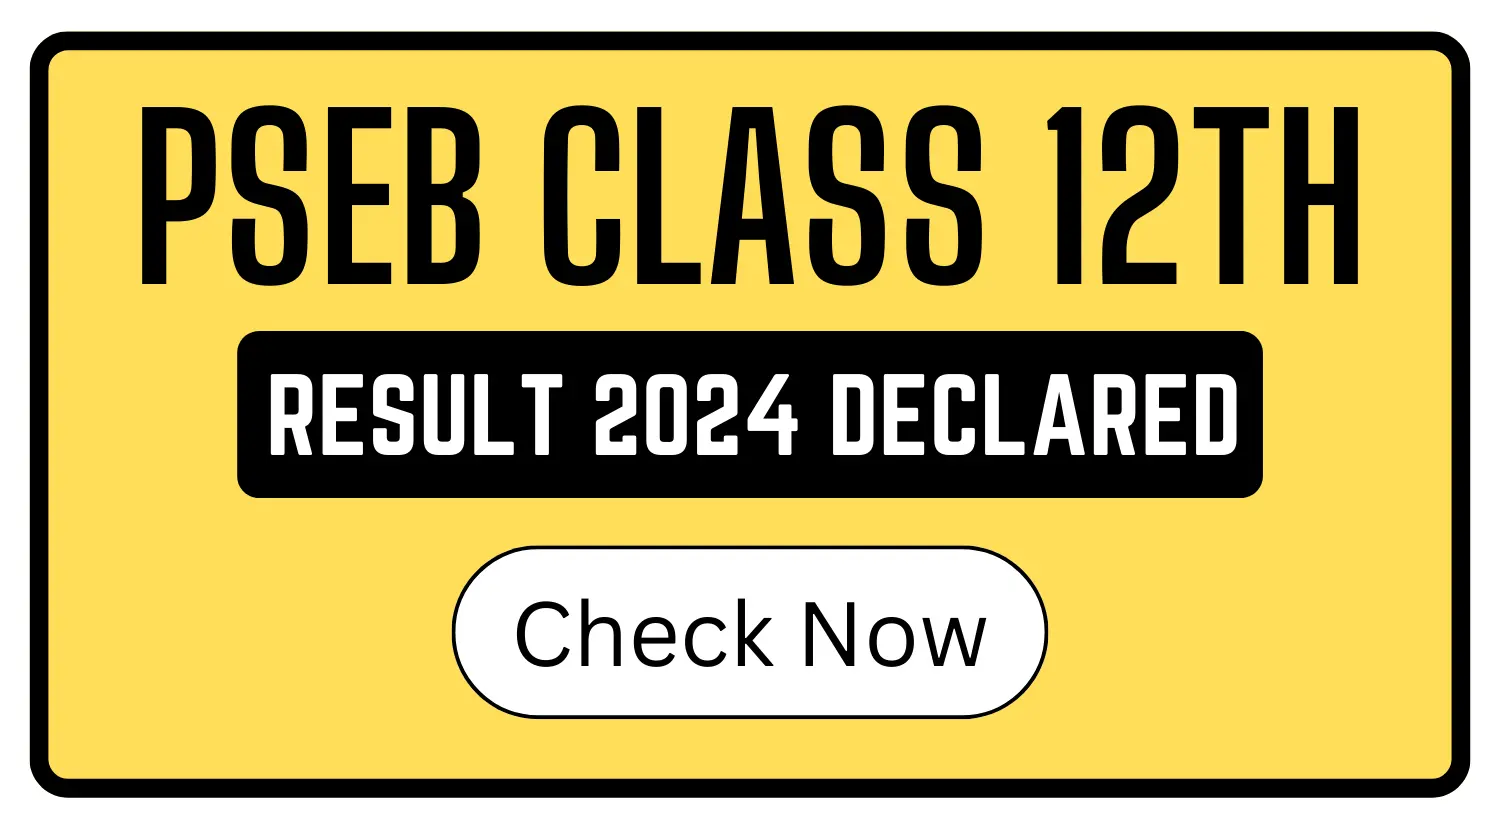 PSEB Class 12th Result 2024 - Declared LIVE Direct Download Link